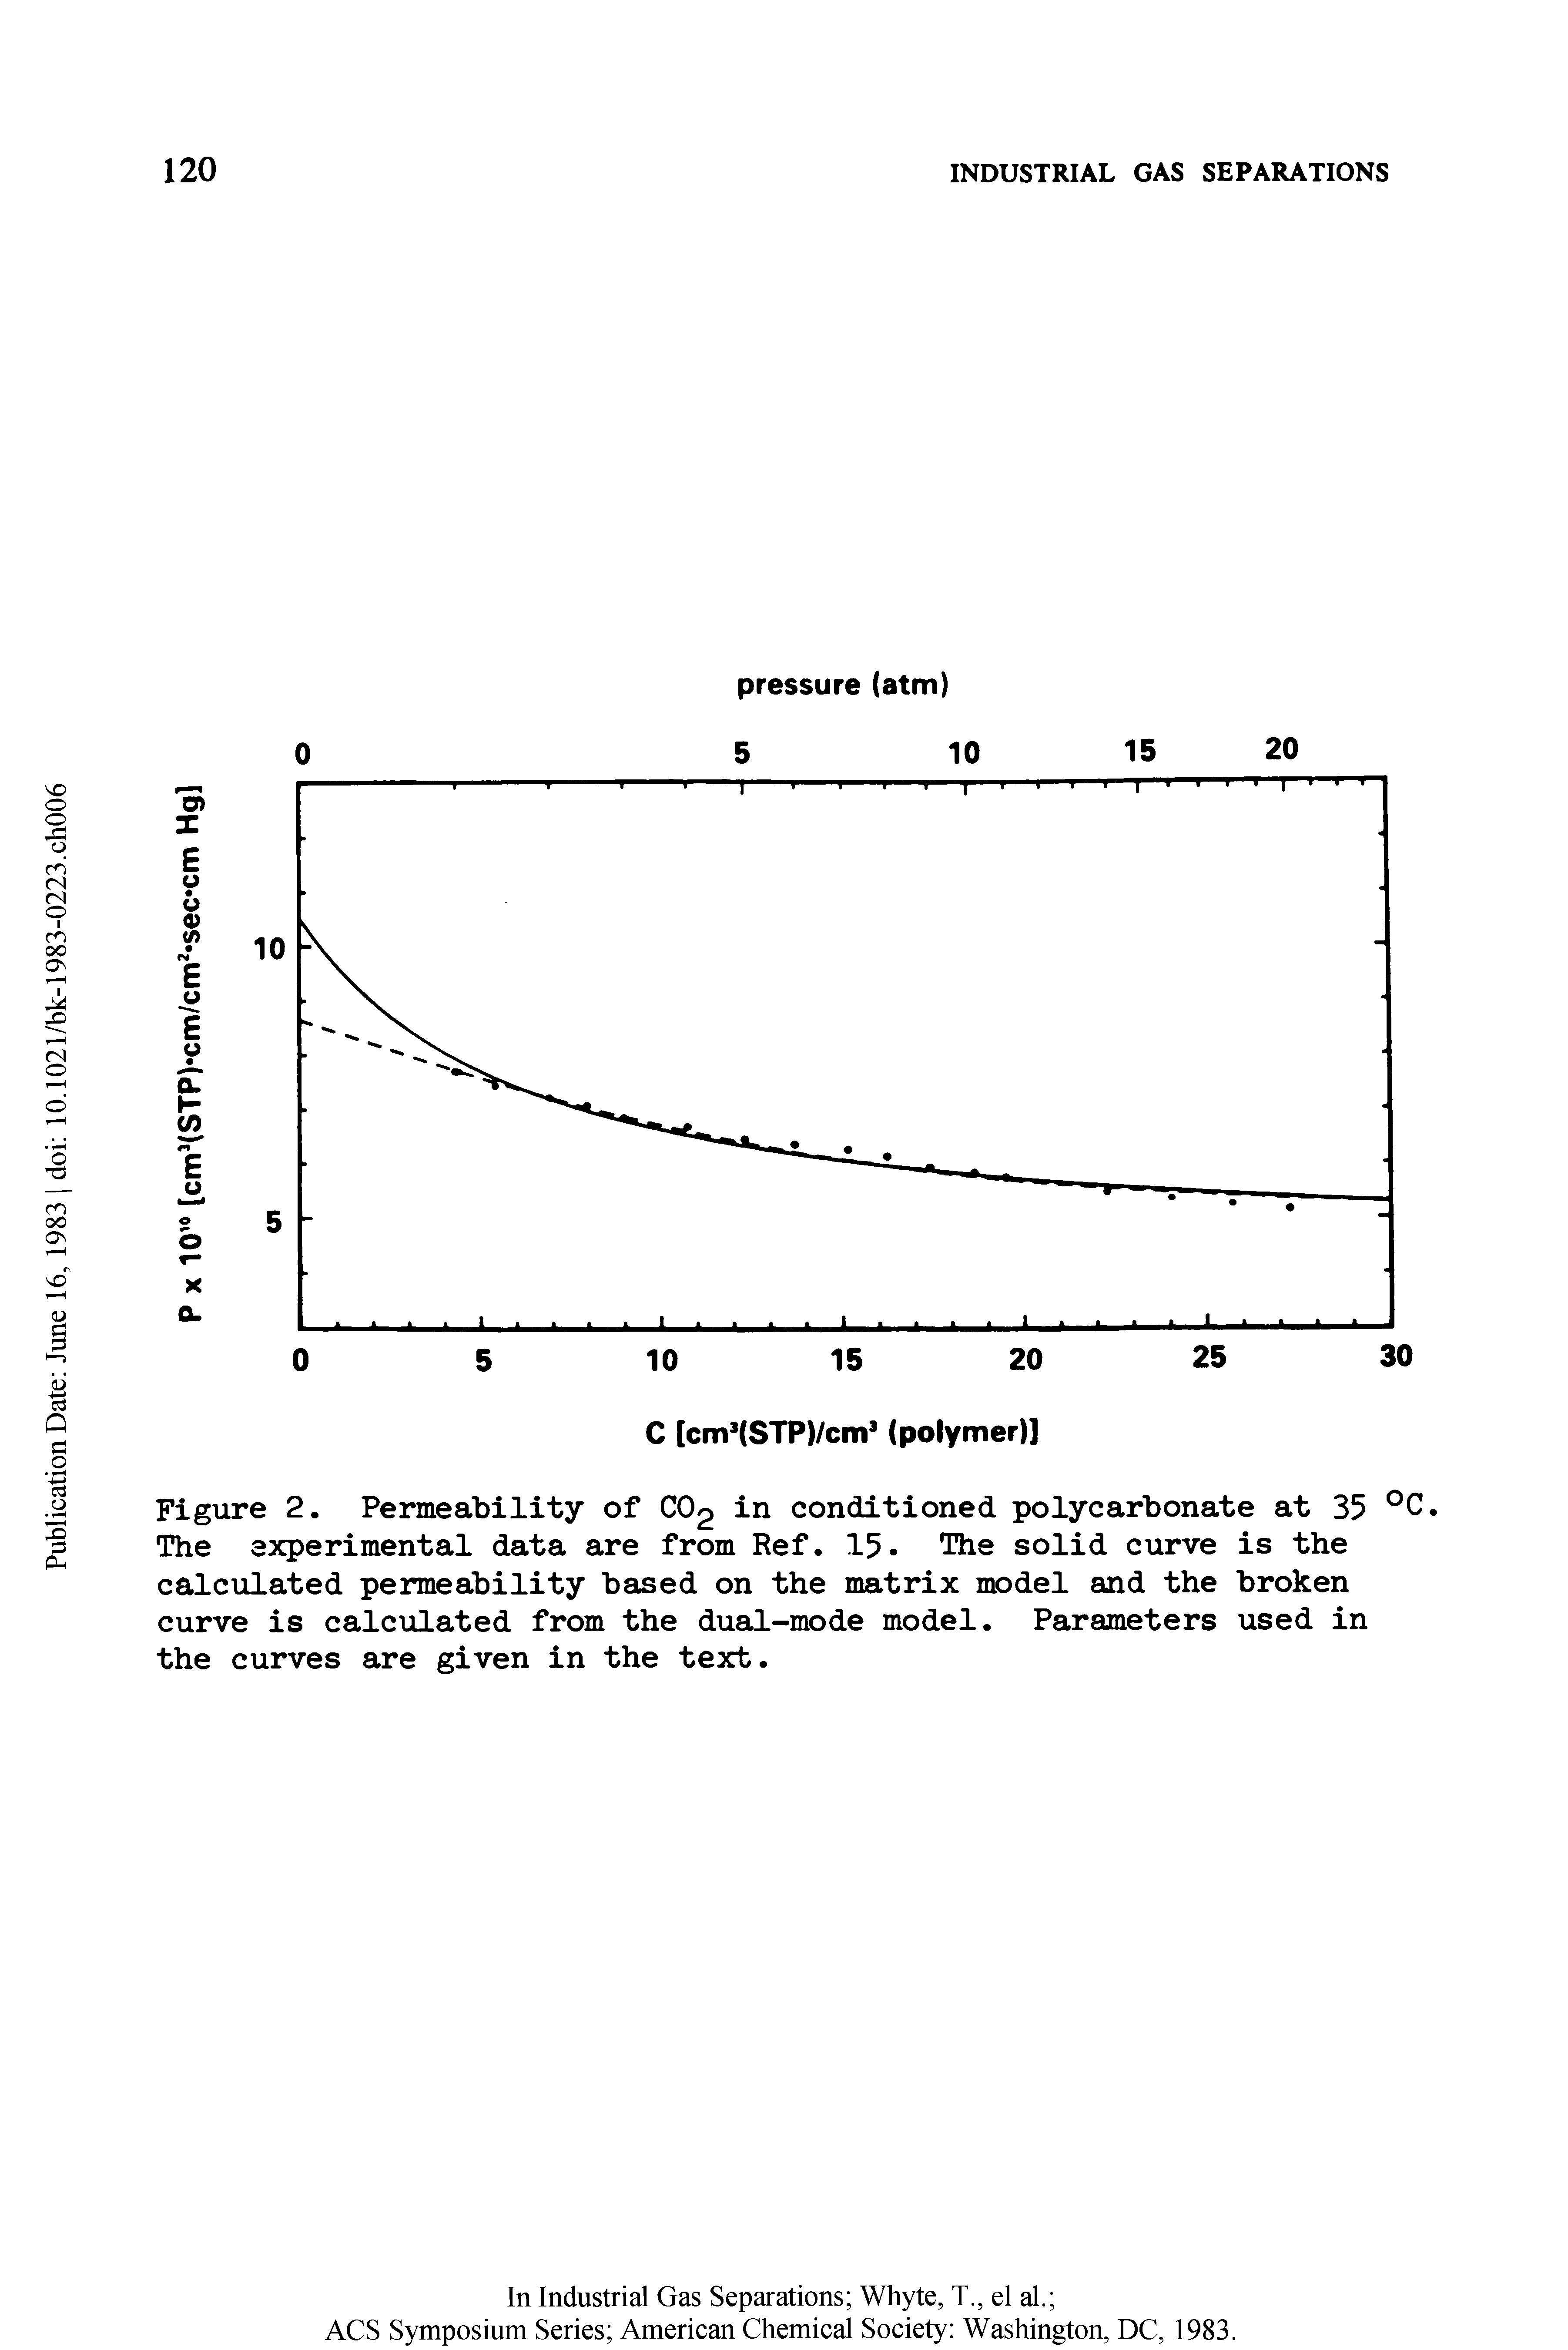 Figure 2. Permeability of CO2 in conditioned polycarbonate at 35 °C. The experimental data are from Ref. 15. The solid curve is the calculated permeability based on the matrix model and the broken curve is calculated from the dual-mode model. Parameters used in the curves are given in the text.